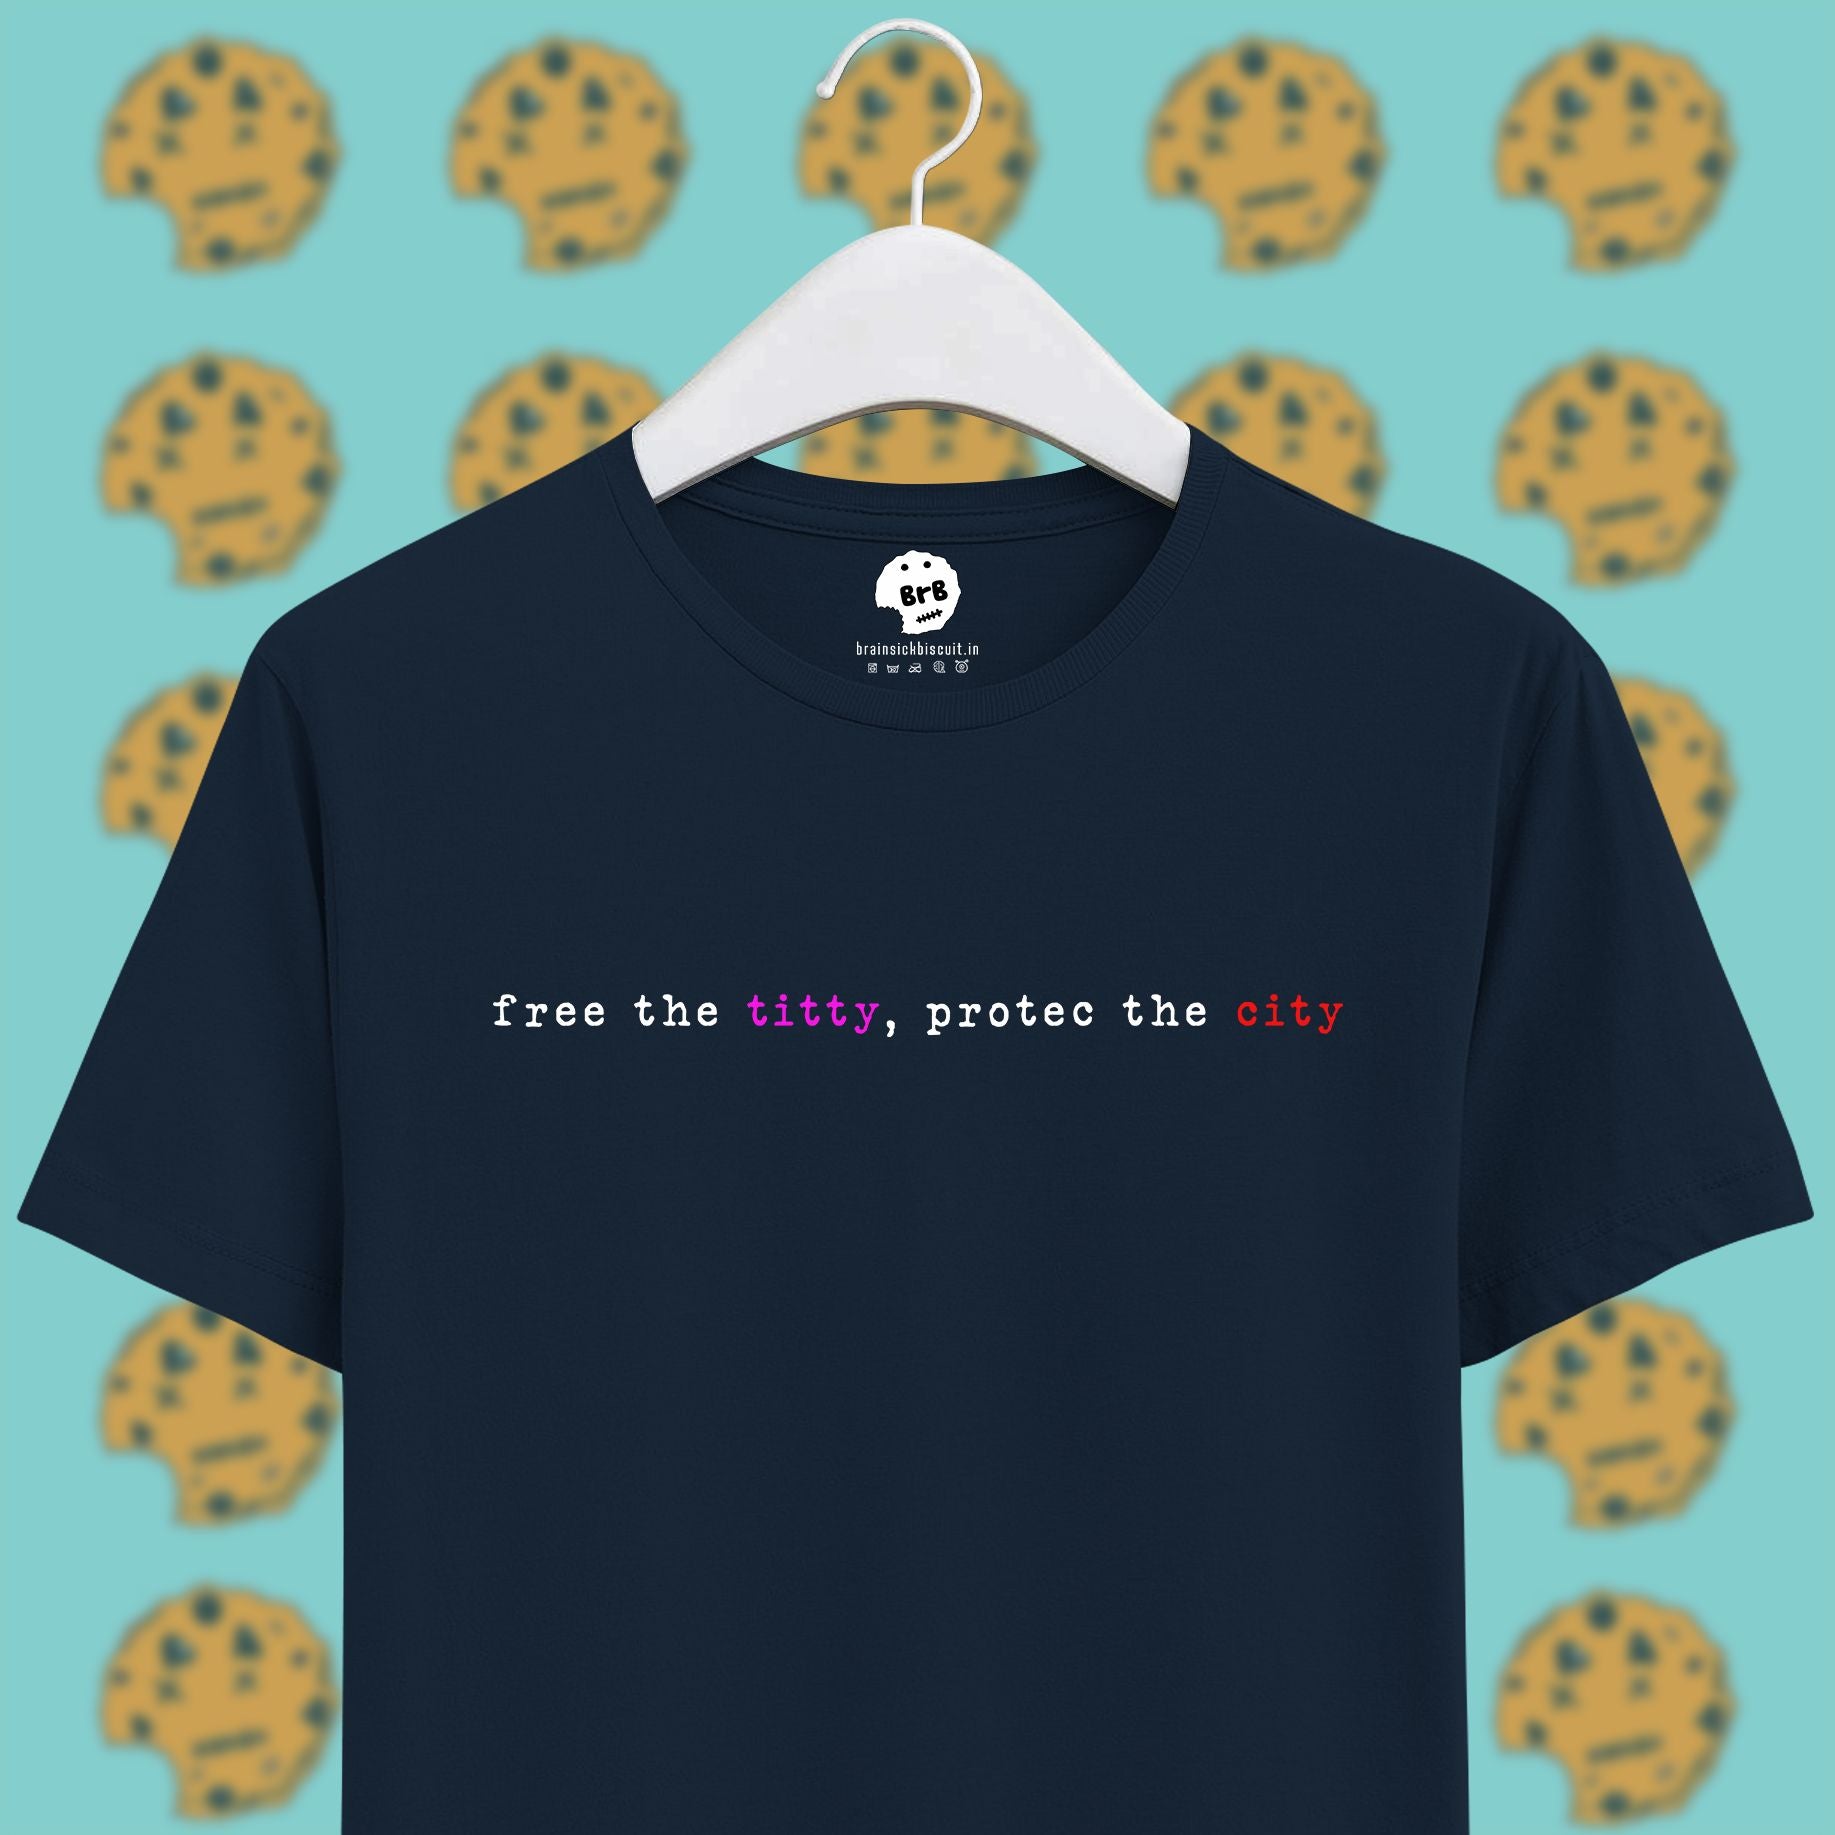 navy blue unisex half sleeves t-shirt with quote free the titty, protec the city